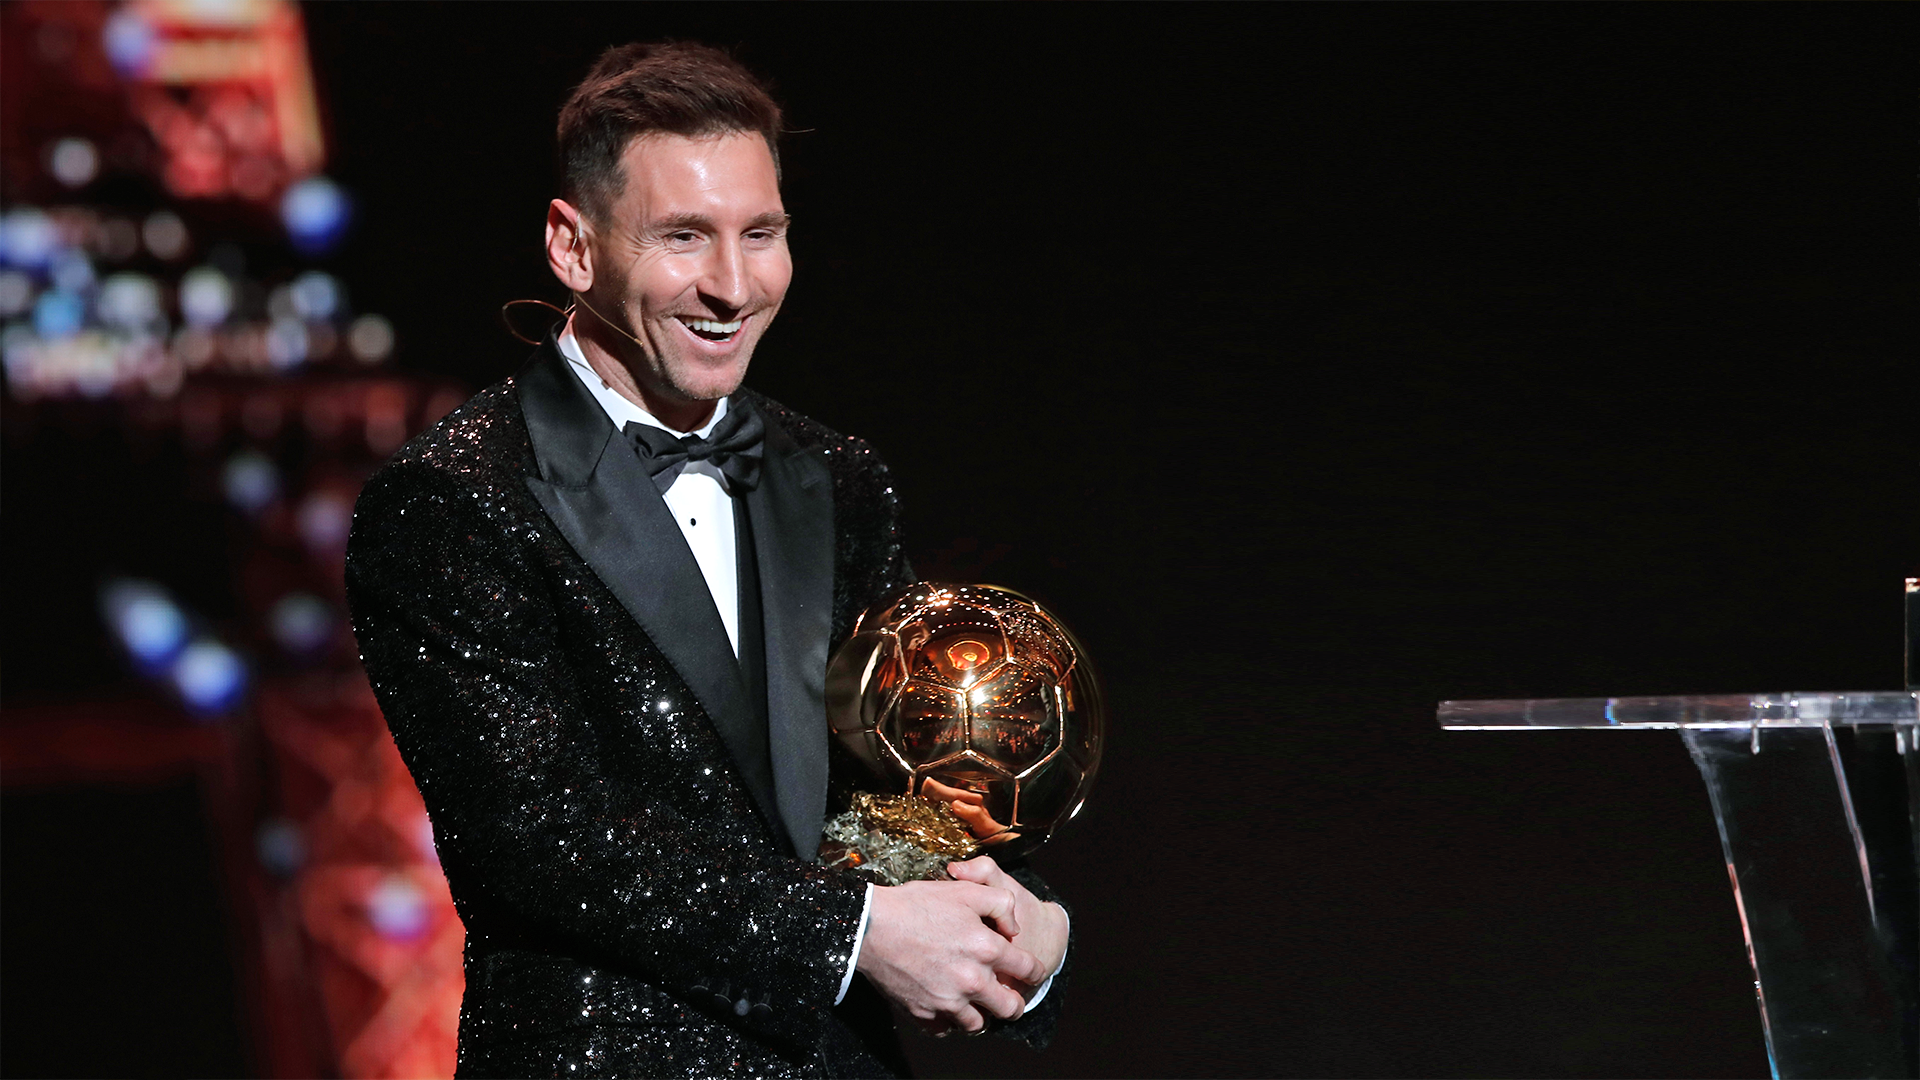 Messi claims record-extending 7th Ballon d'Or